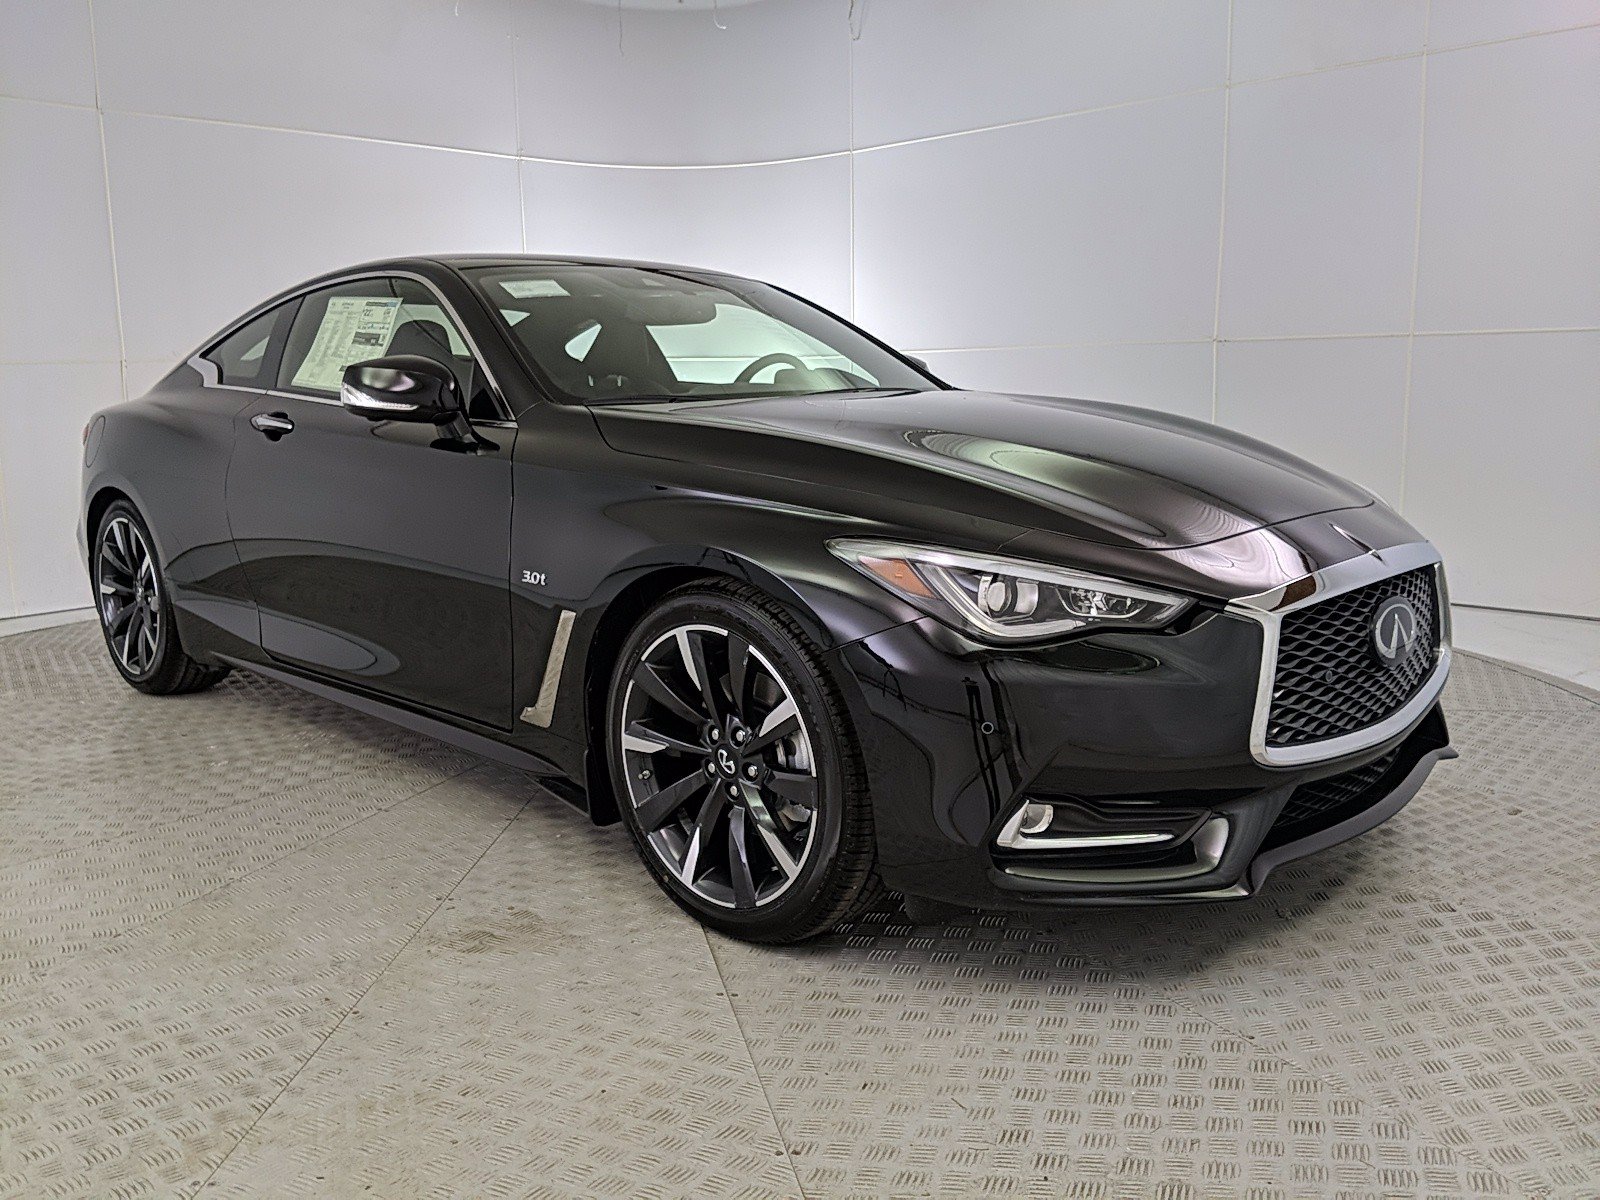 New 2020 INFINITI Q60 3.0t LUXE RWD COUPE in Hoover I341158 INFINITI